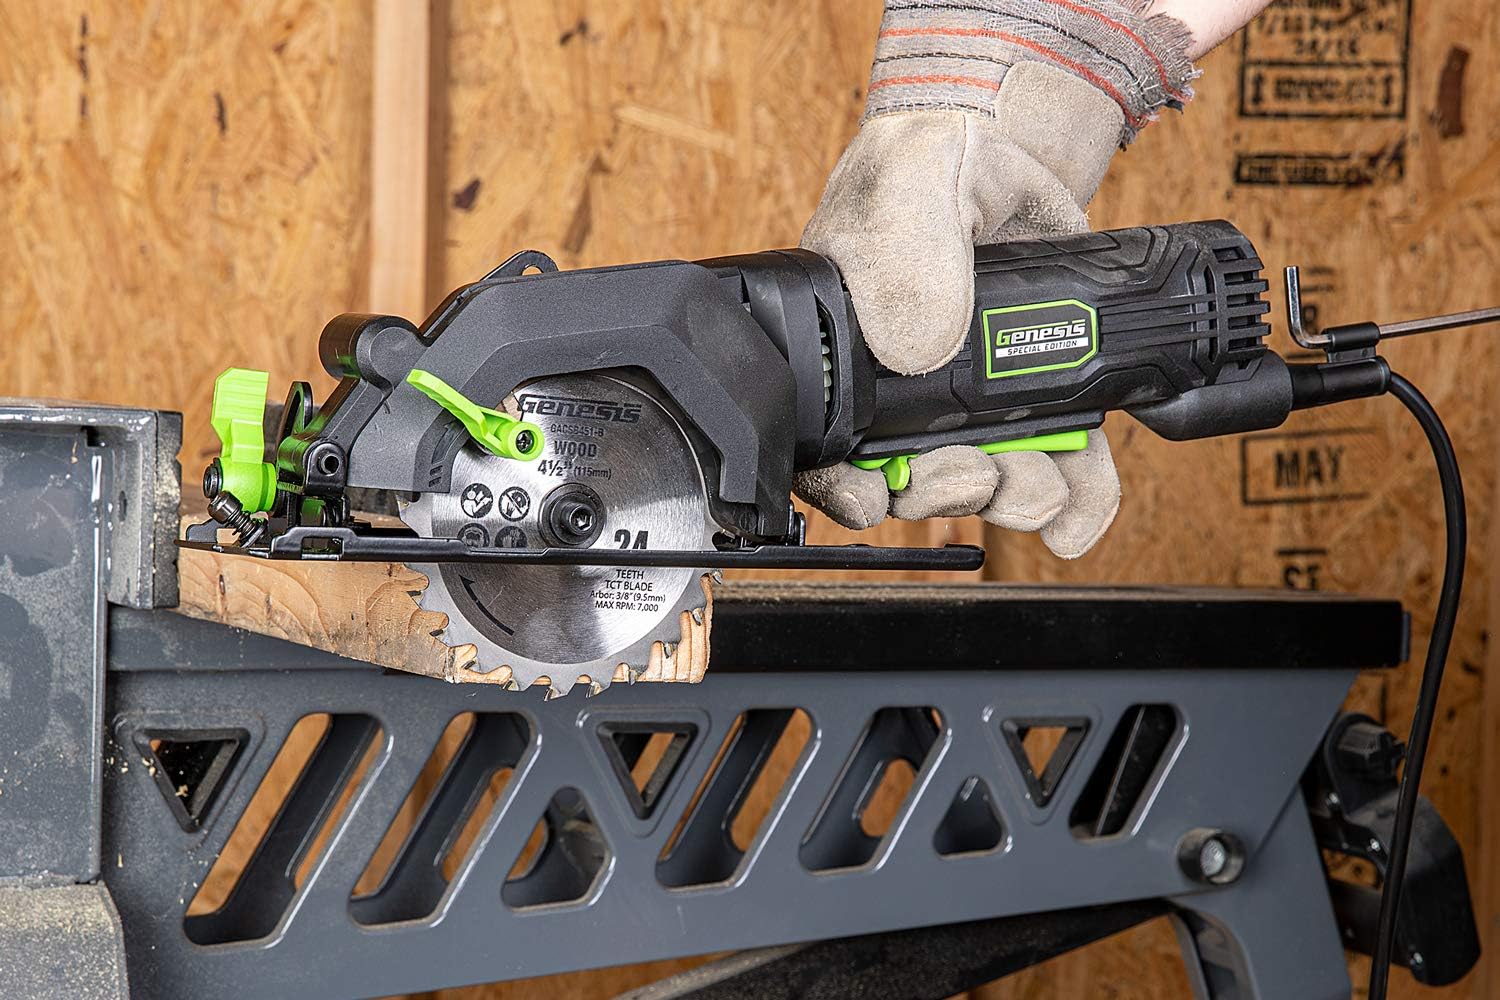 Genesis GCS445SE 4.0 Amp 4-1/2" Compact Circular Saw with 24T Carbide-Tipped Blade, Rip Guide, Vacuum Adapter, and Blade Wrench